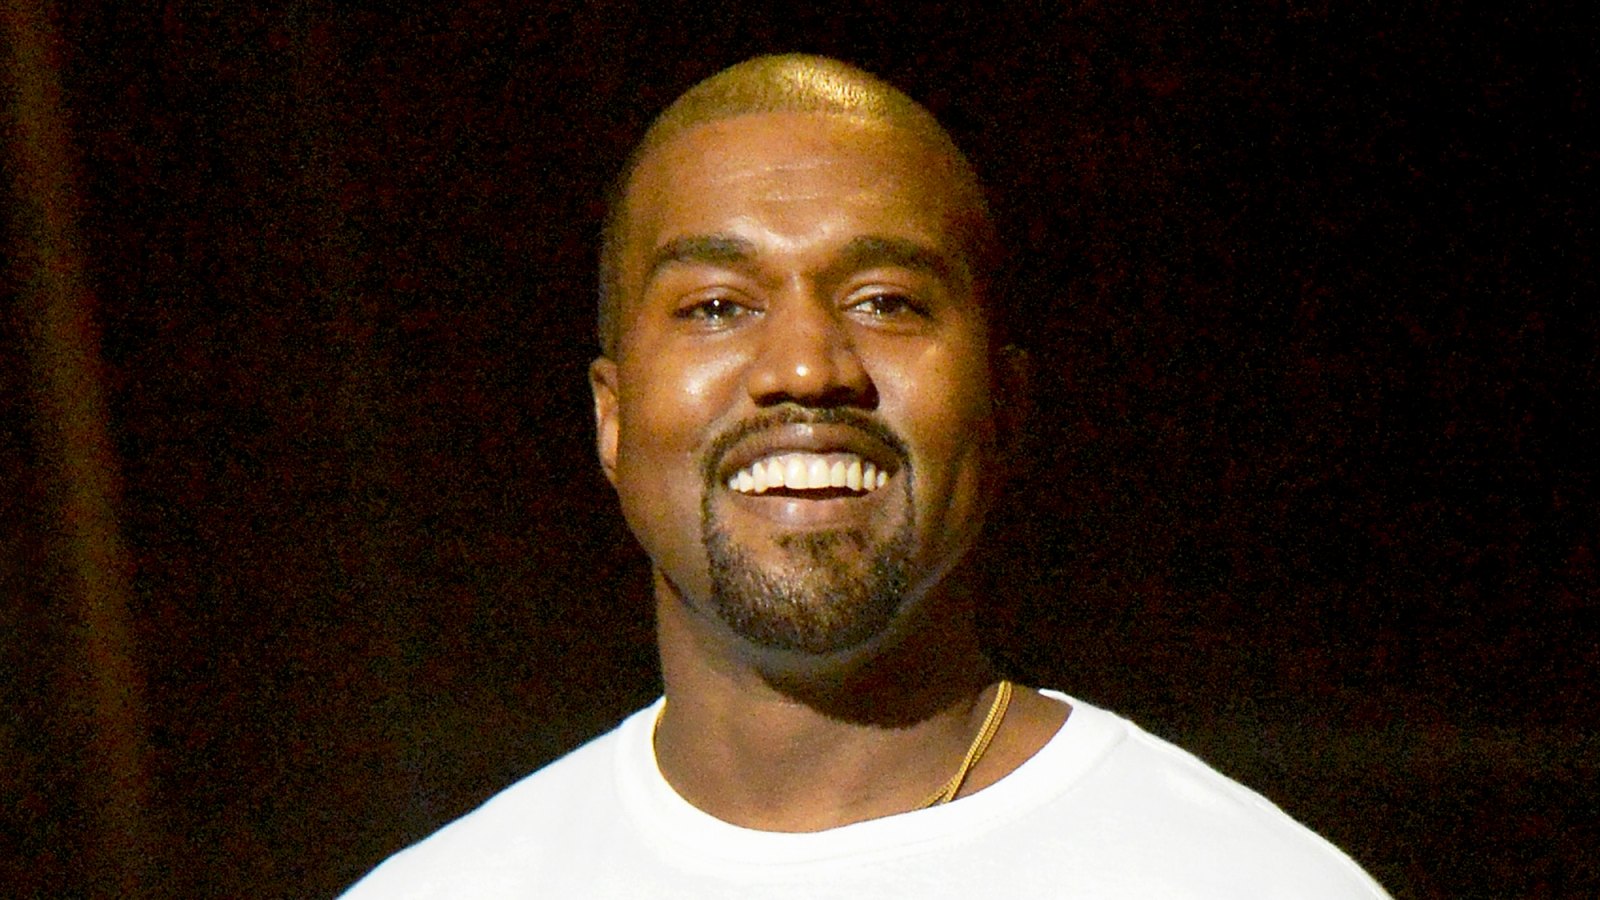 Kanye West during the 2016 MTV Video Music Awards at Madison Square Garden in New York City.